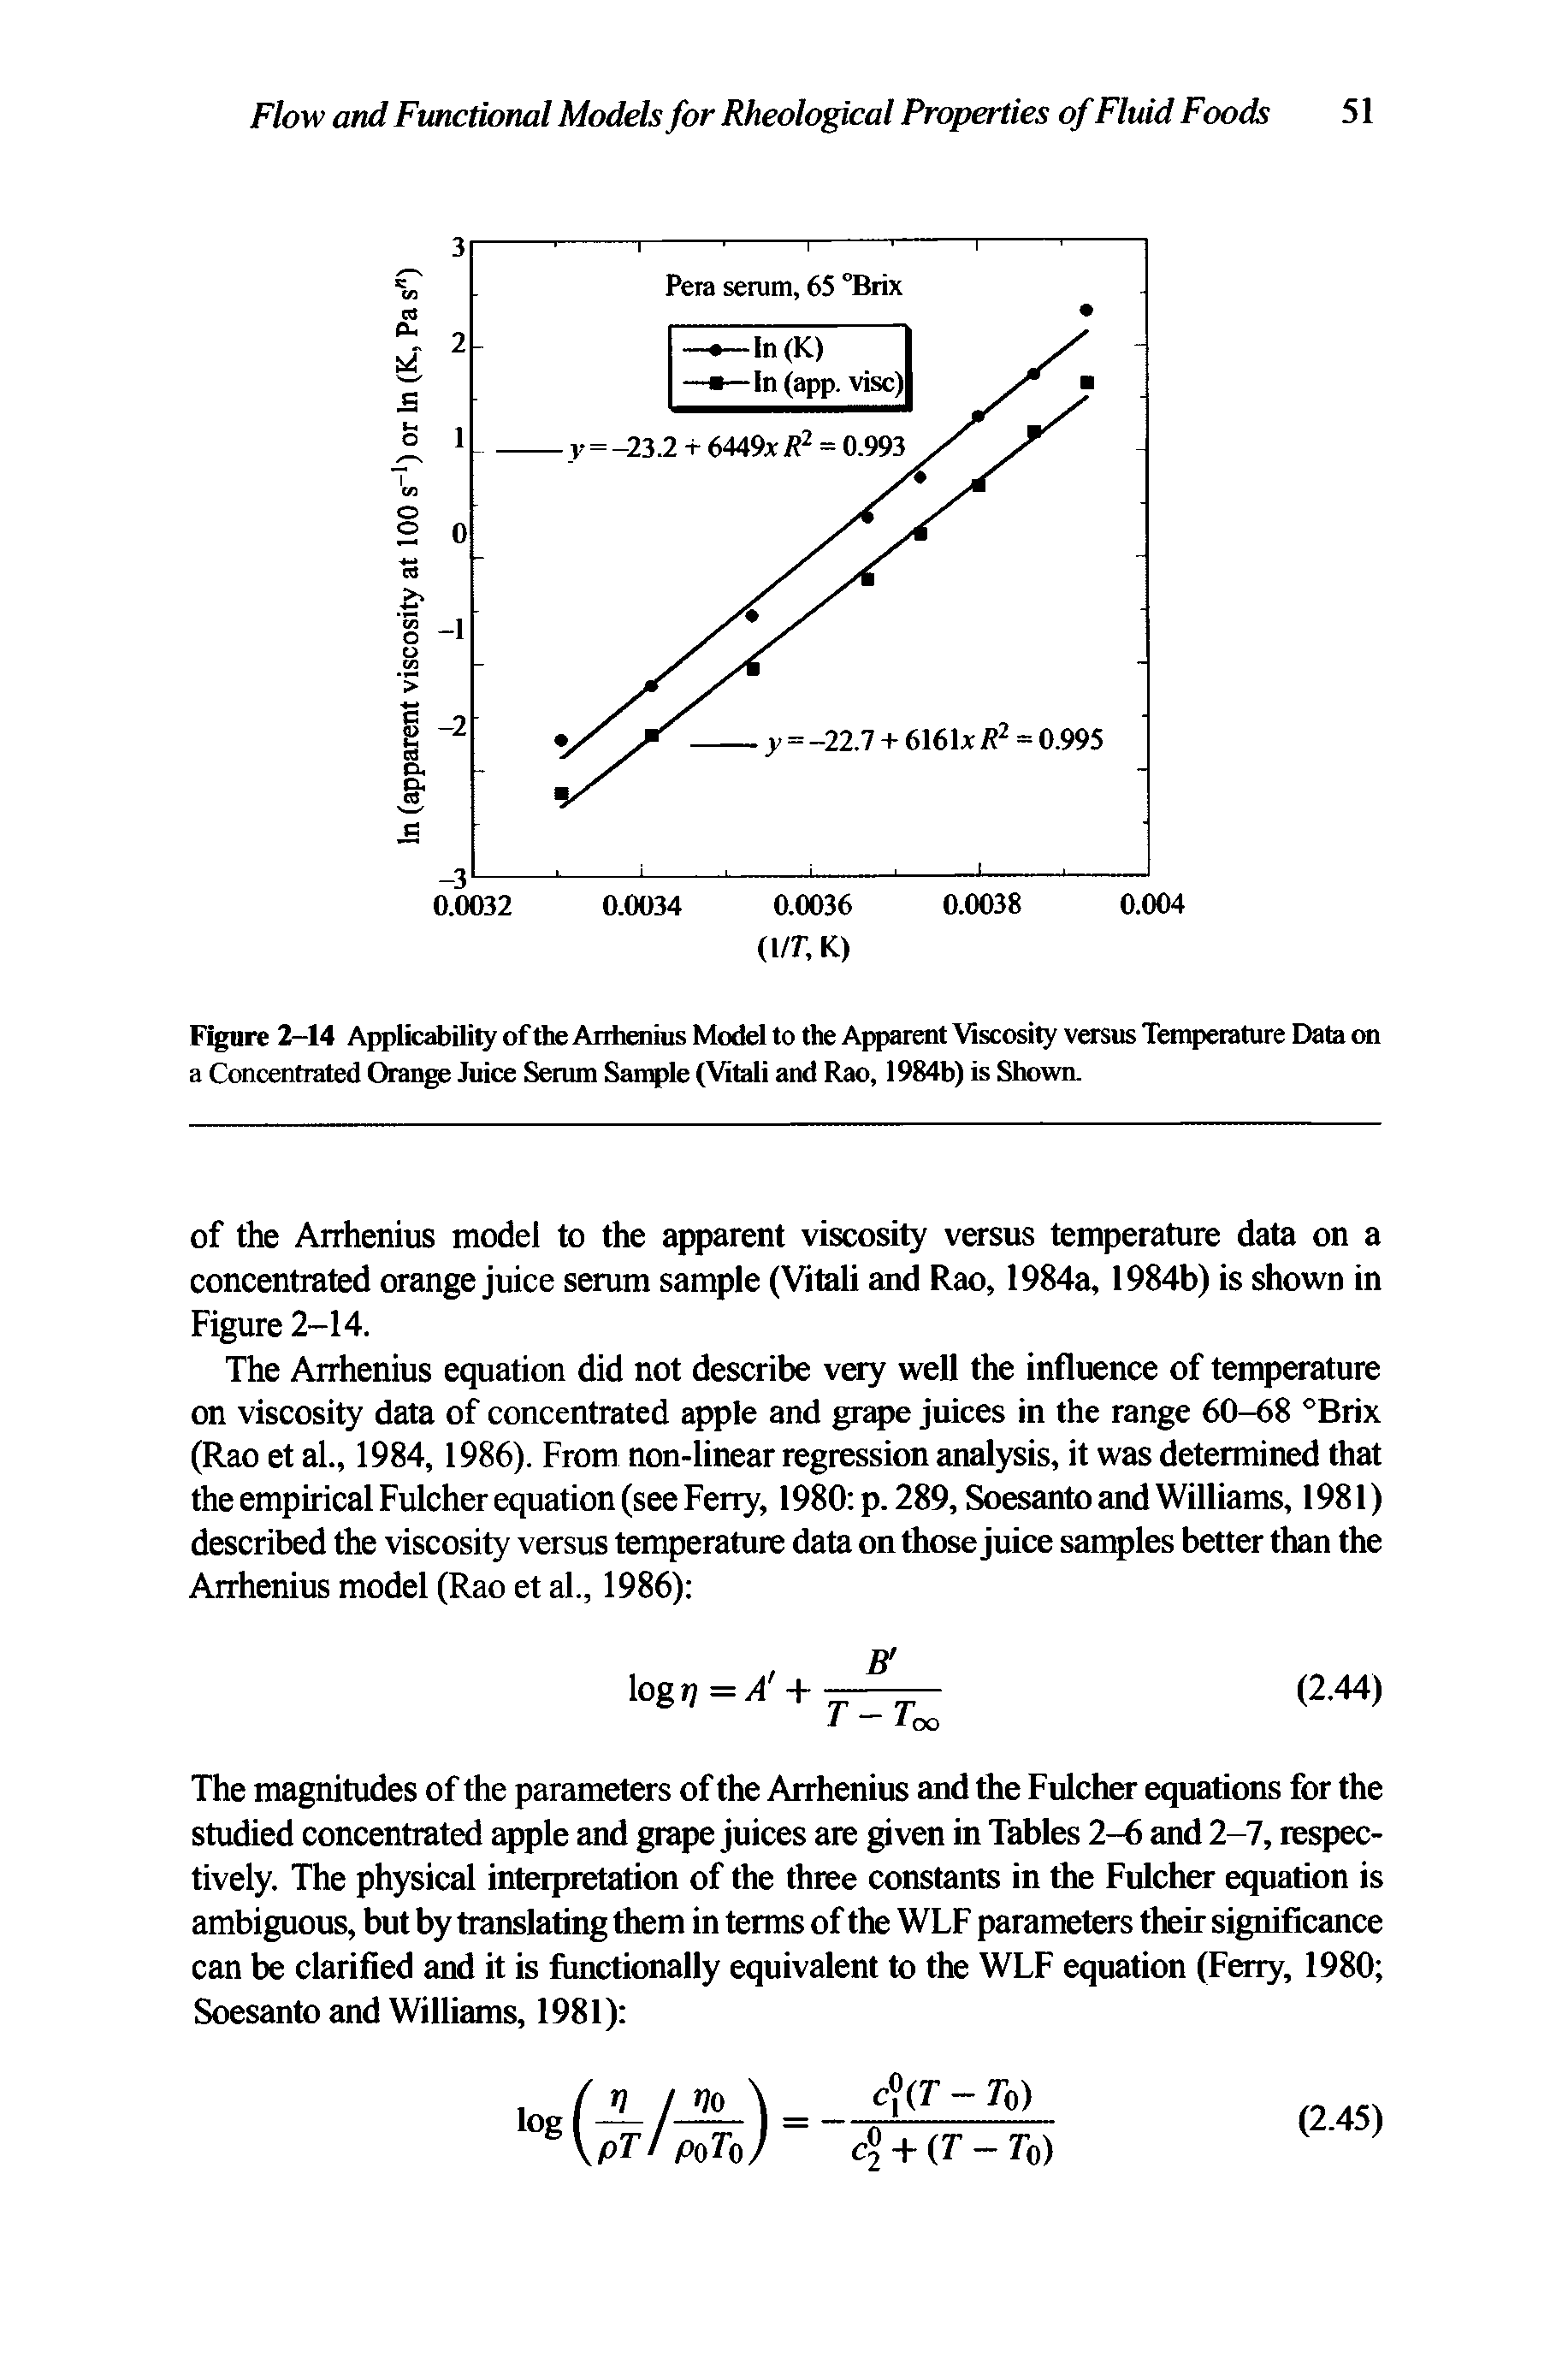 Figure 2-14 Applicability of the Arrhenius Model to the Apparent Viscosity versus Temperature Data on a Concentrated Orange Juice Serum Sample (Vitali and Rao, 1984b) is Shown.